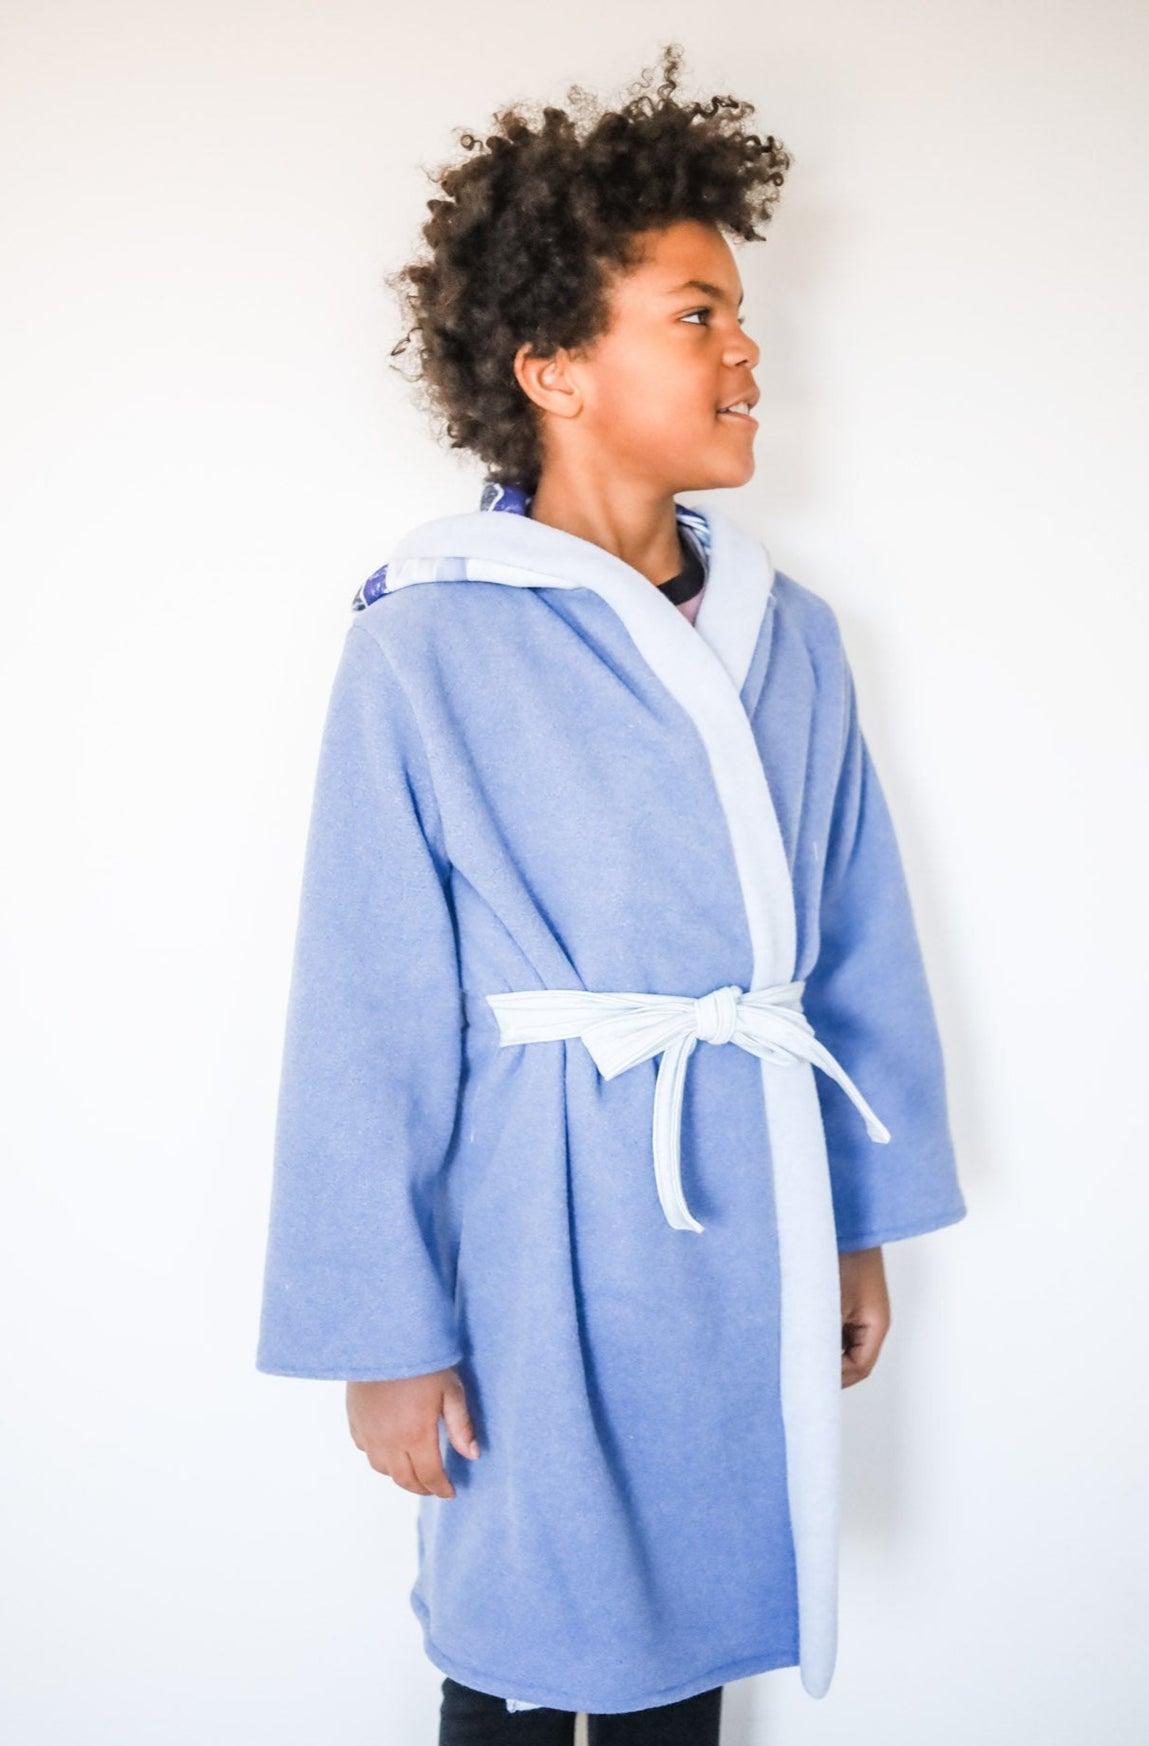 Robe Dressing gown sewing pattern | 12M-10Y, Knit and Woven |  HUGSandCUDDLES 1177 - PUPERITA